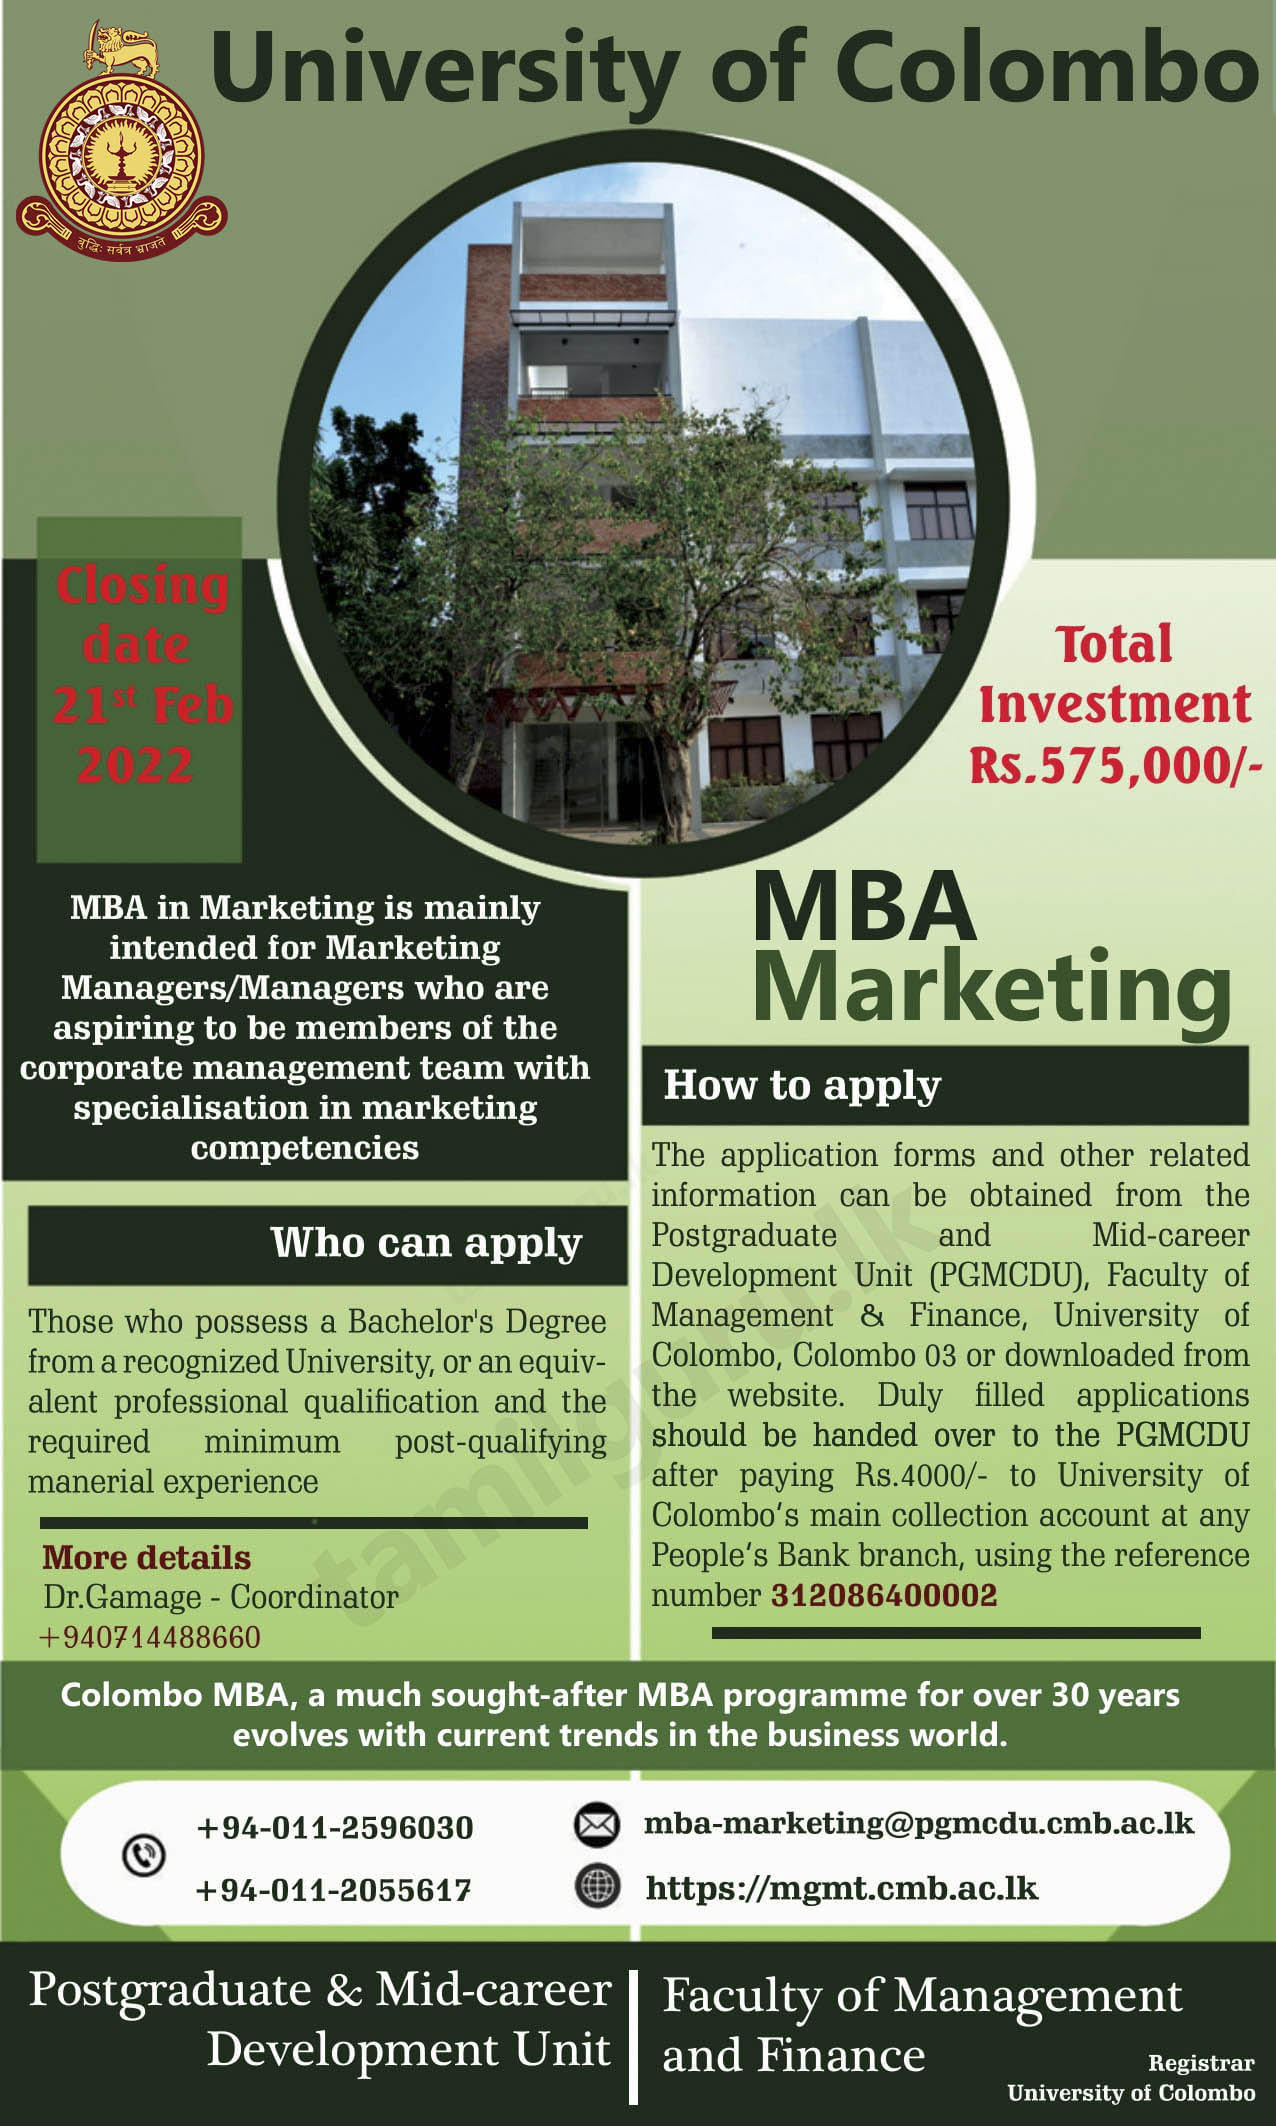 Calling Applications for Master of Business Administration (MBA) in Marketing Program - University of Colombo 2022